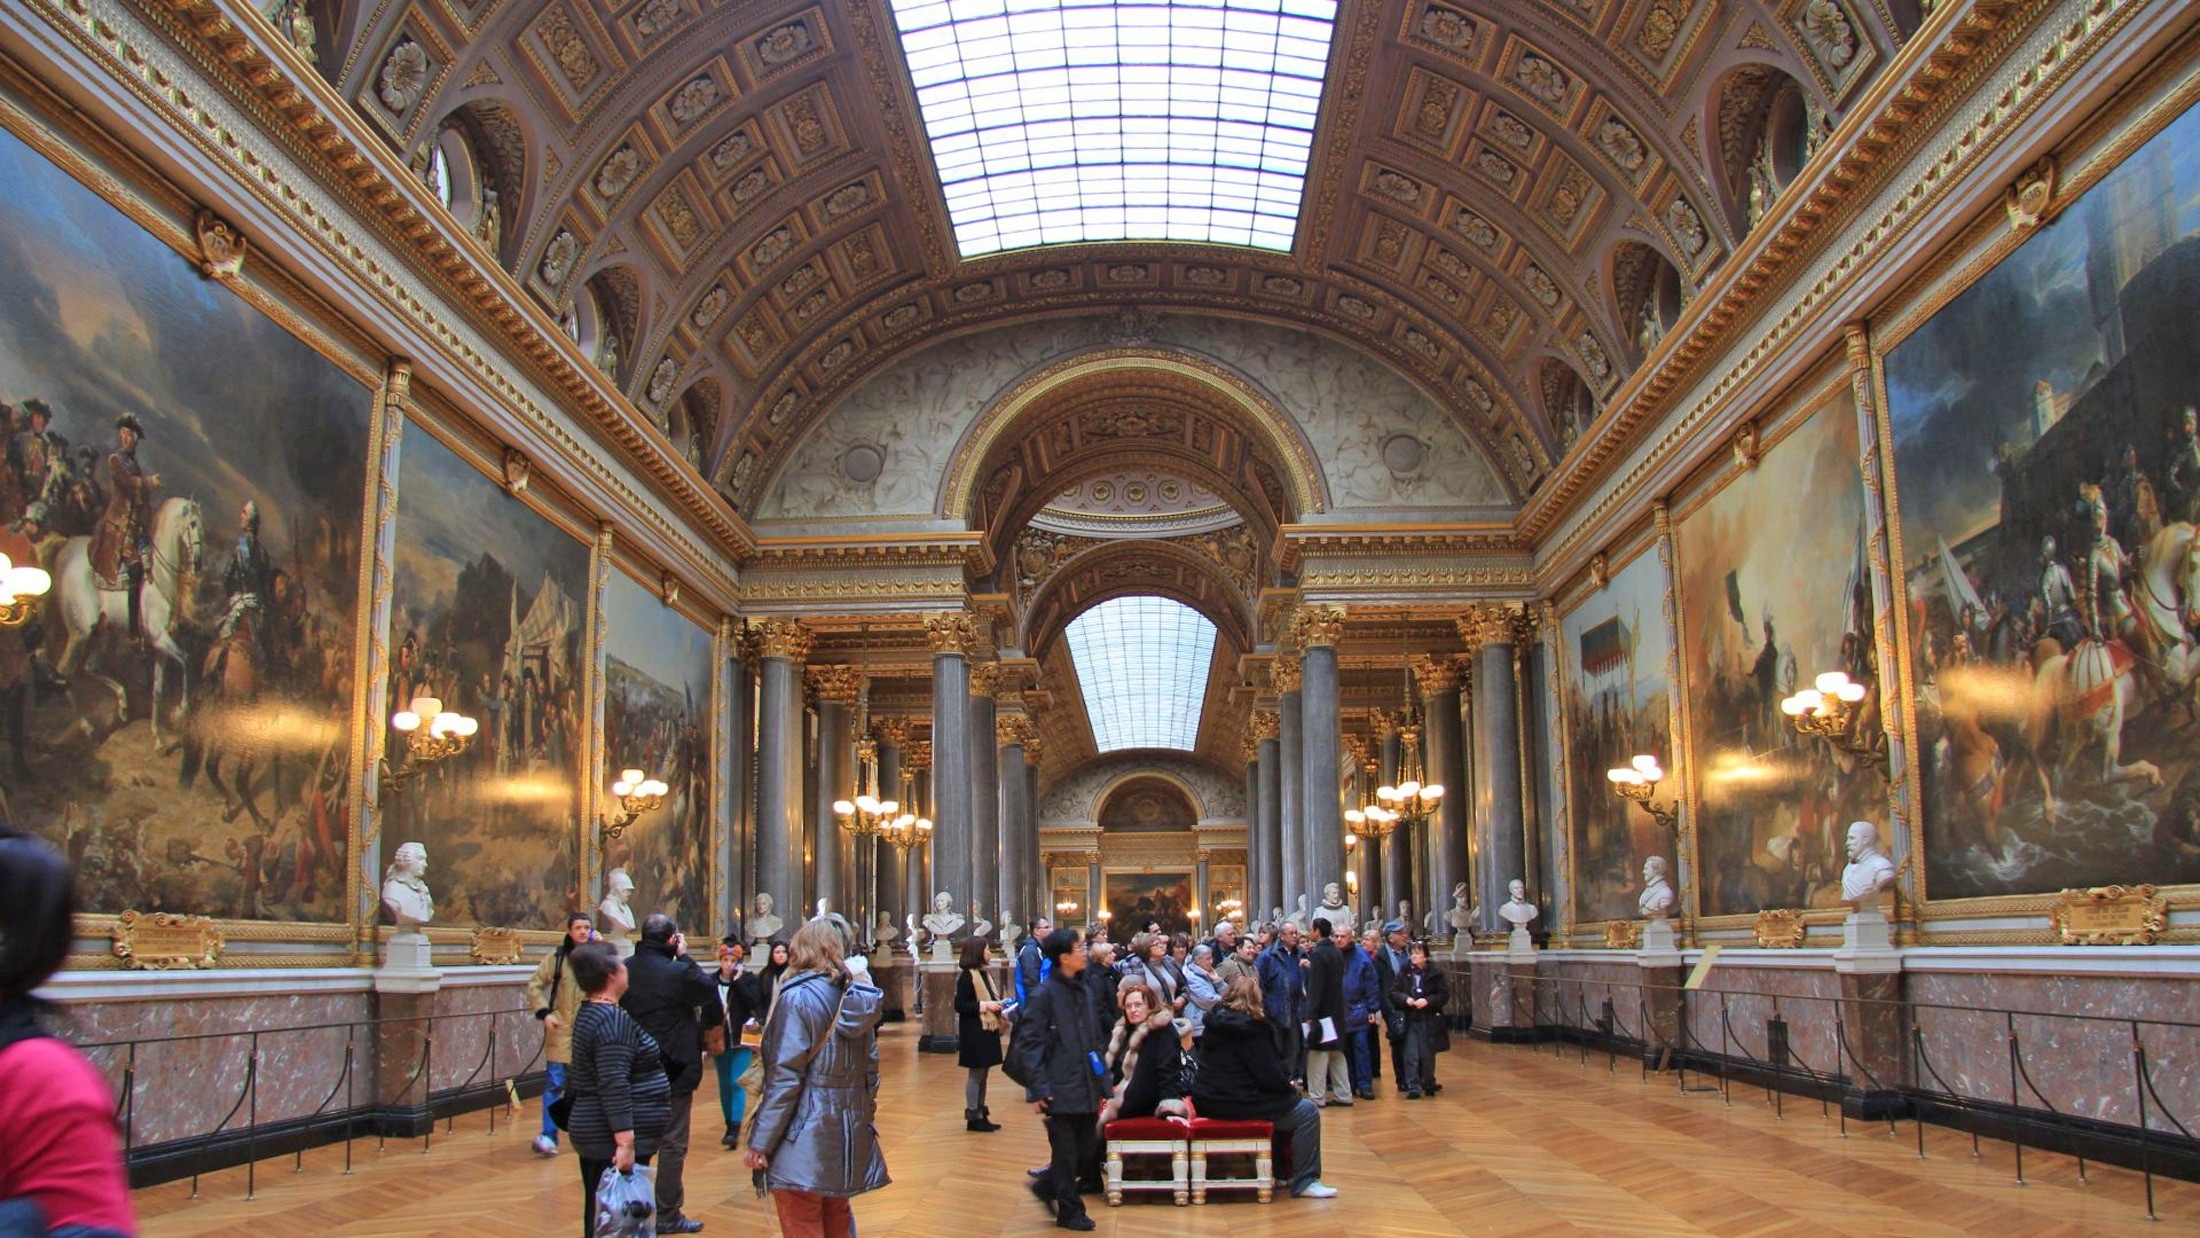 group of people in gallery during daytime